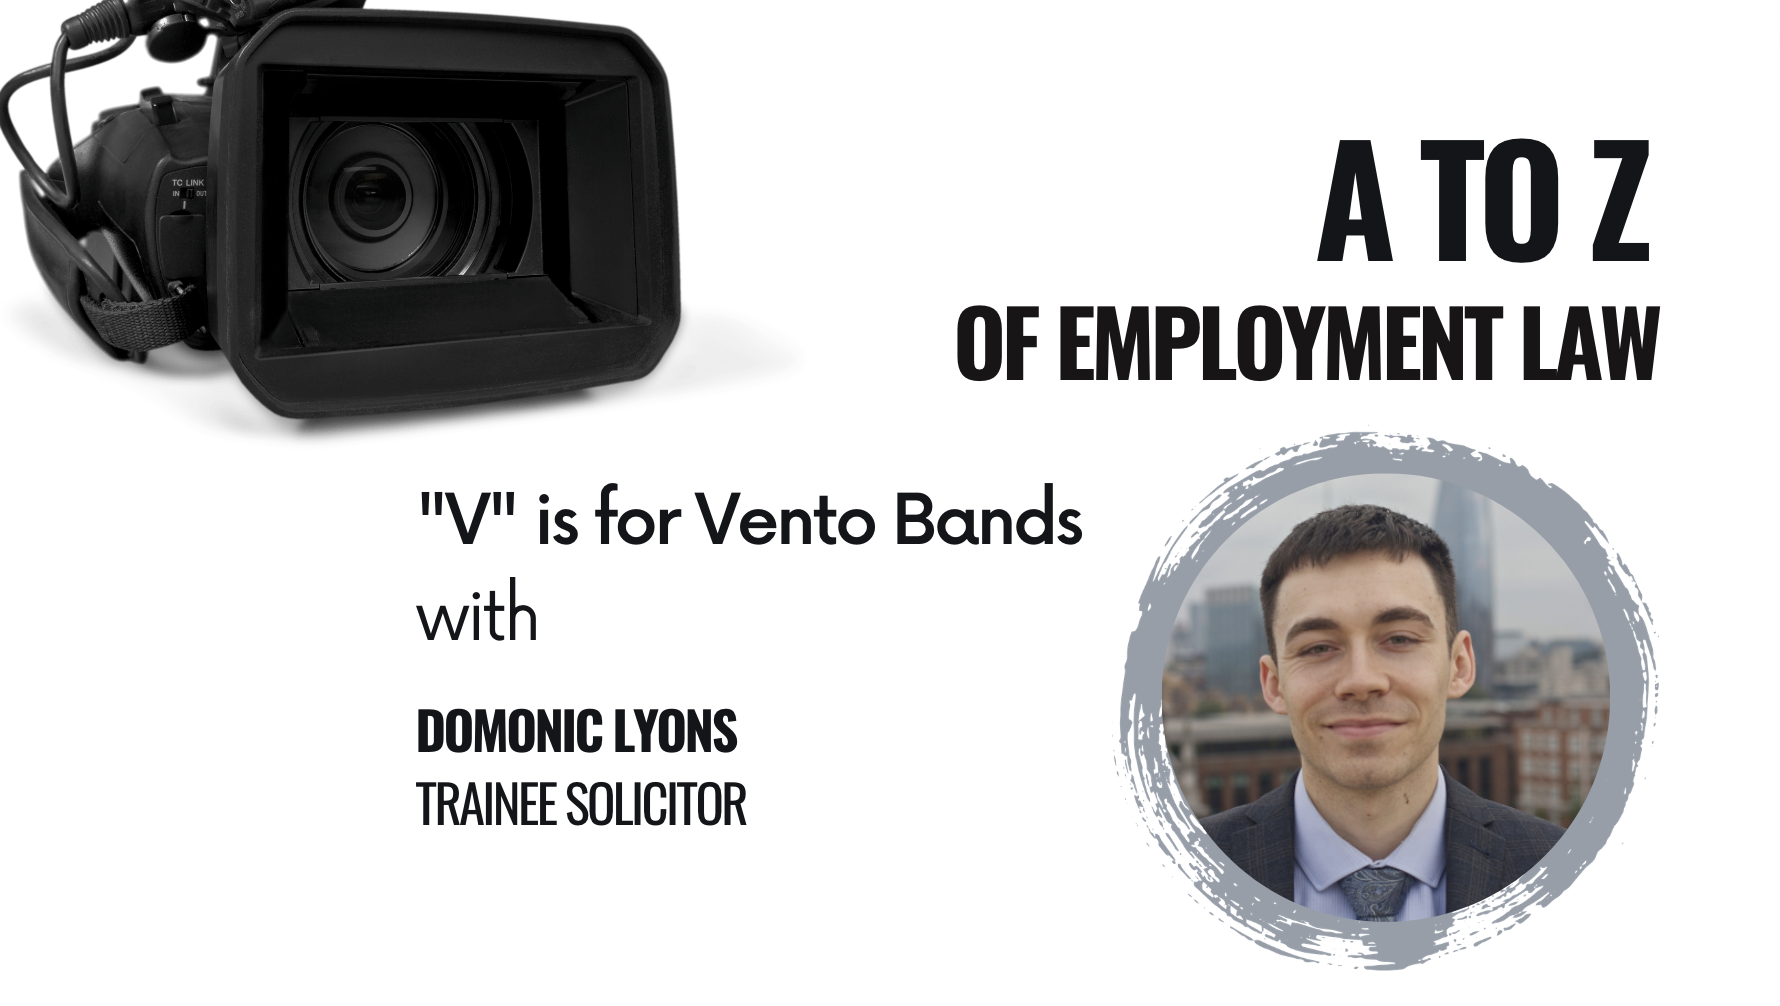 A to Z of Employment Law V is for Vento Bands